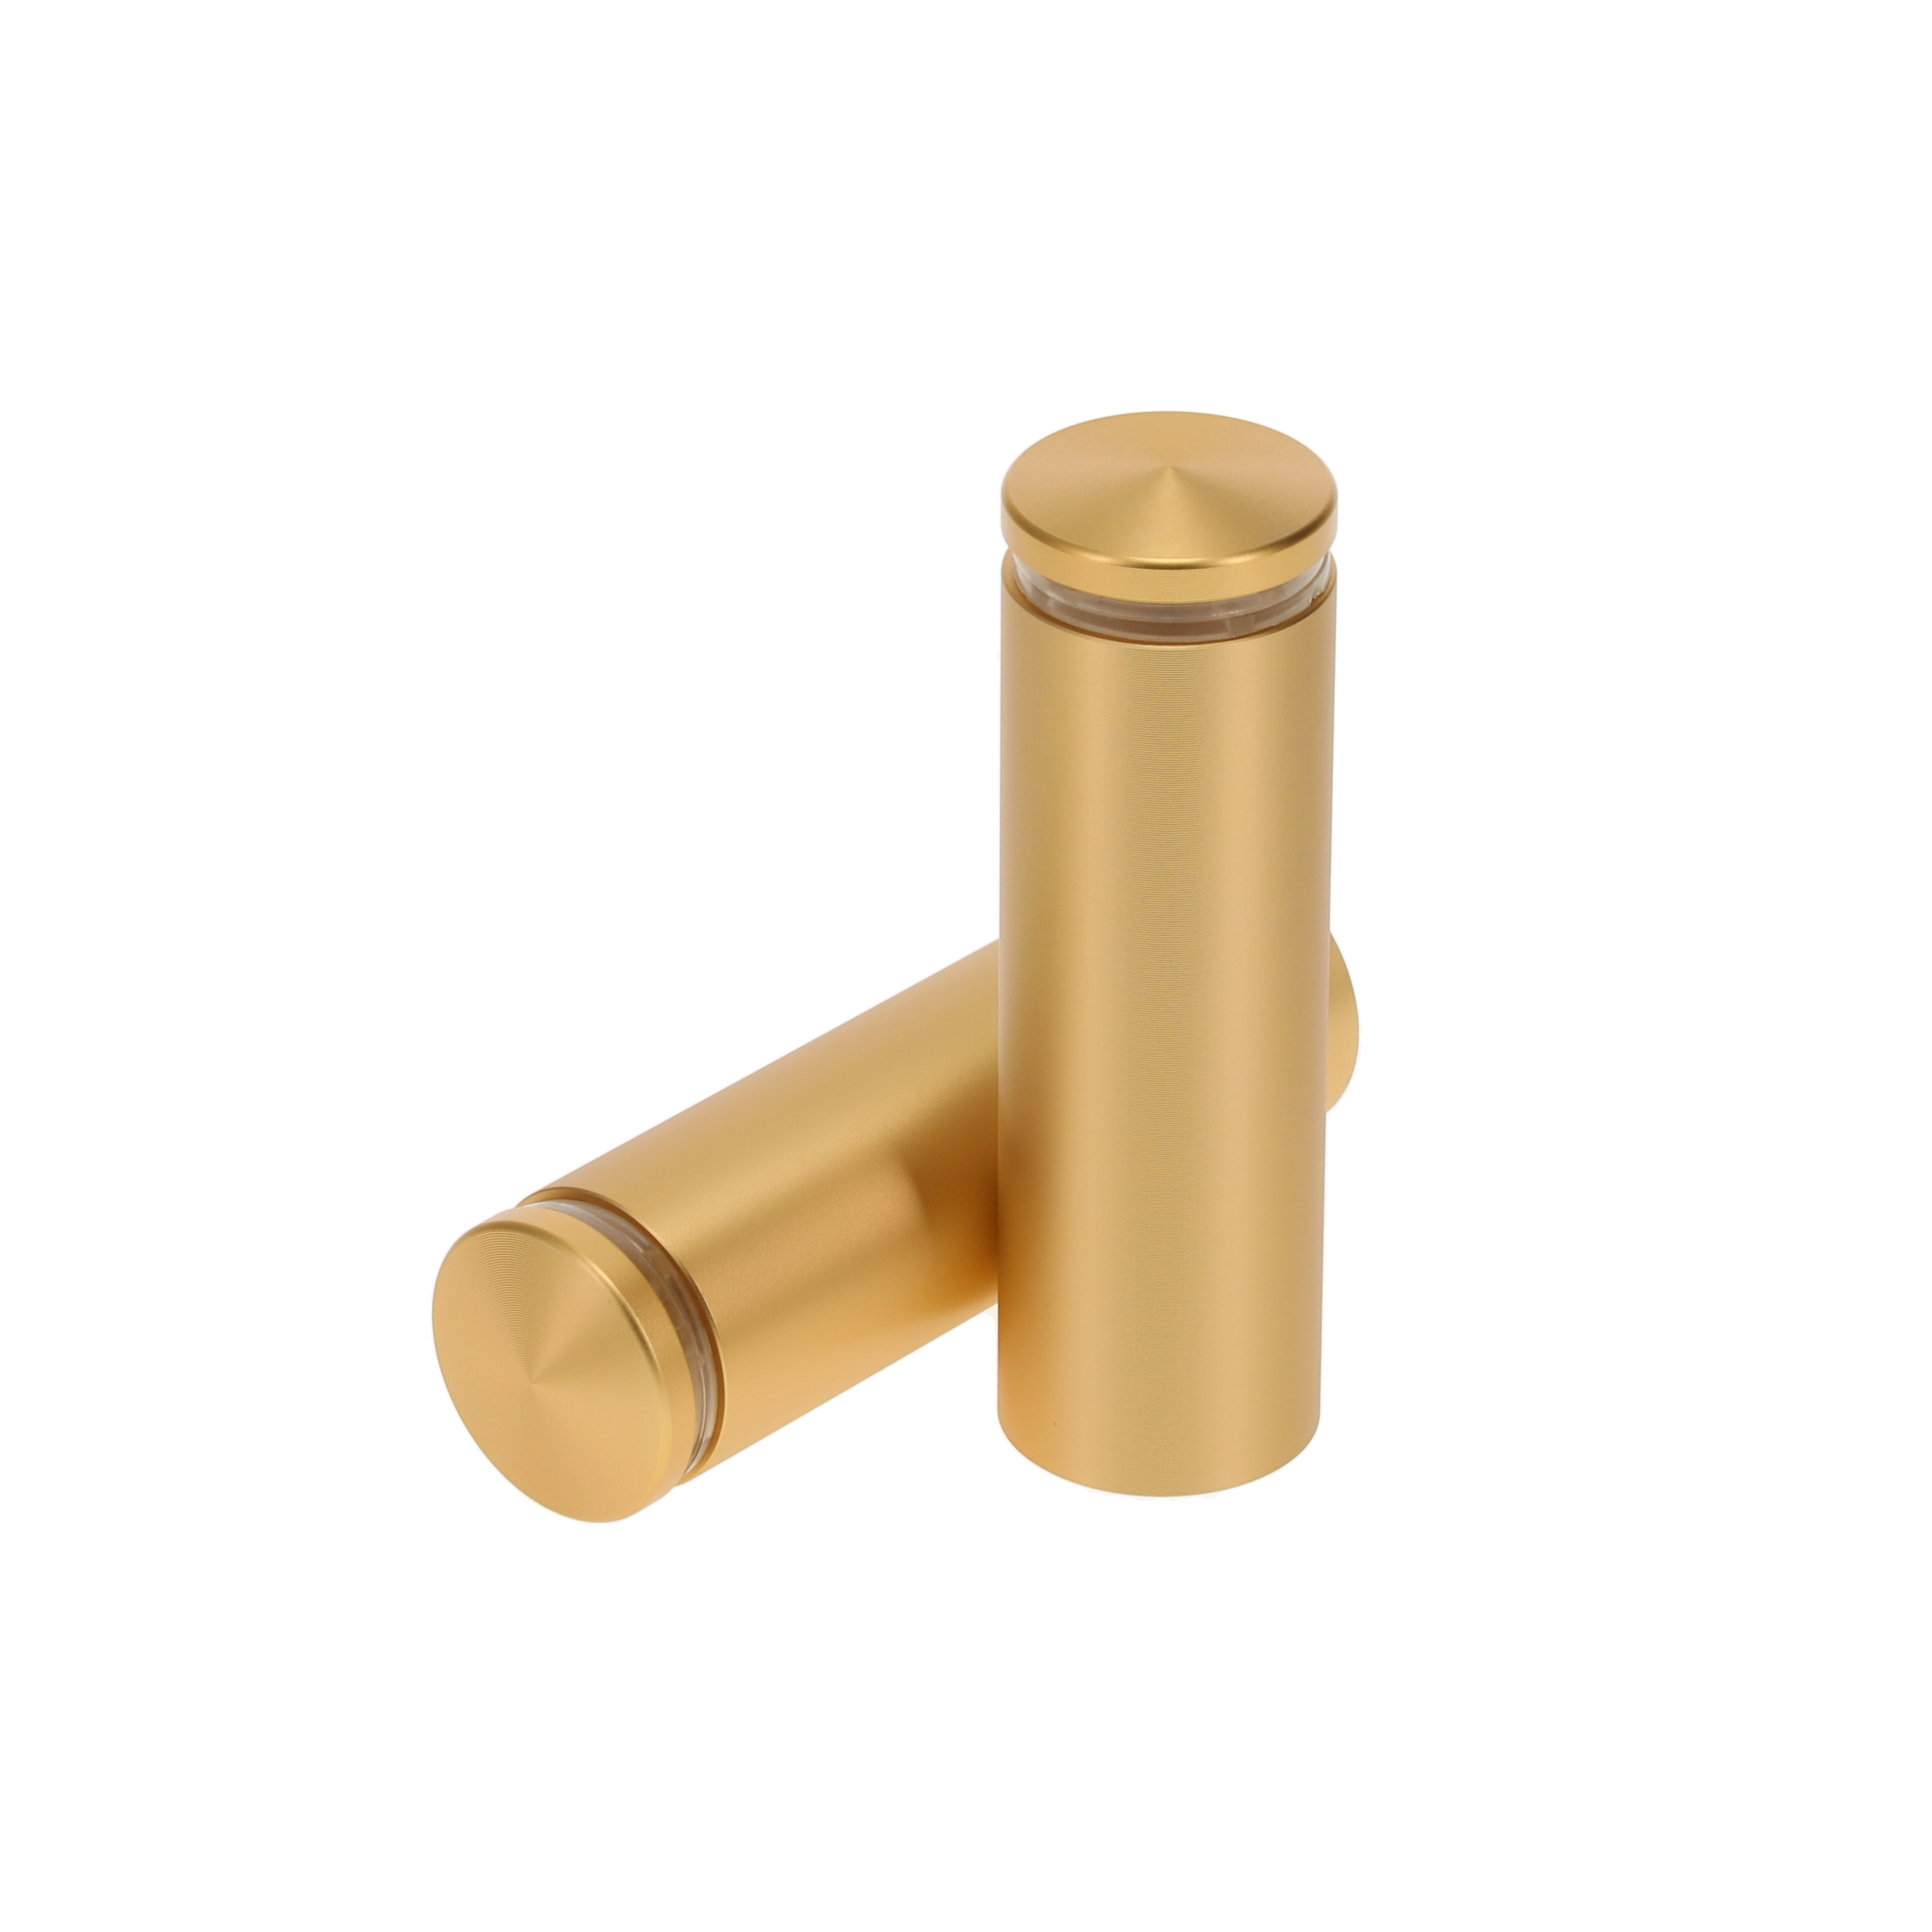 7/8'' Diameter X 2-1/2'' Barrel Length, Aluminum Rounded Head Standoffs, Matte Champagne Anodized Finish Easy Fasten Standoff (For Inside / Outside use) [Required Material Hole Size: 7/16'']